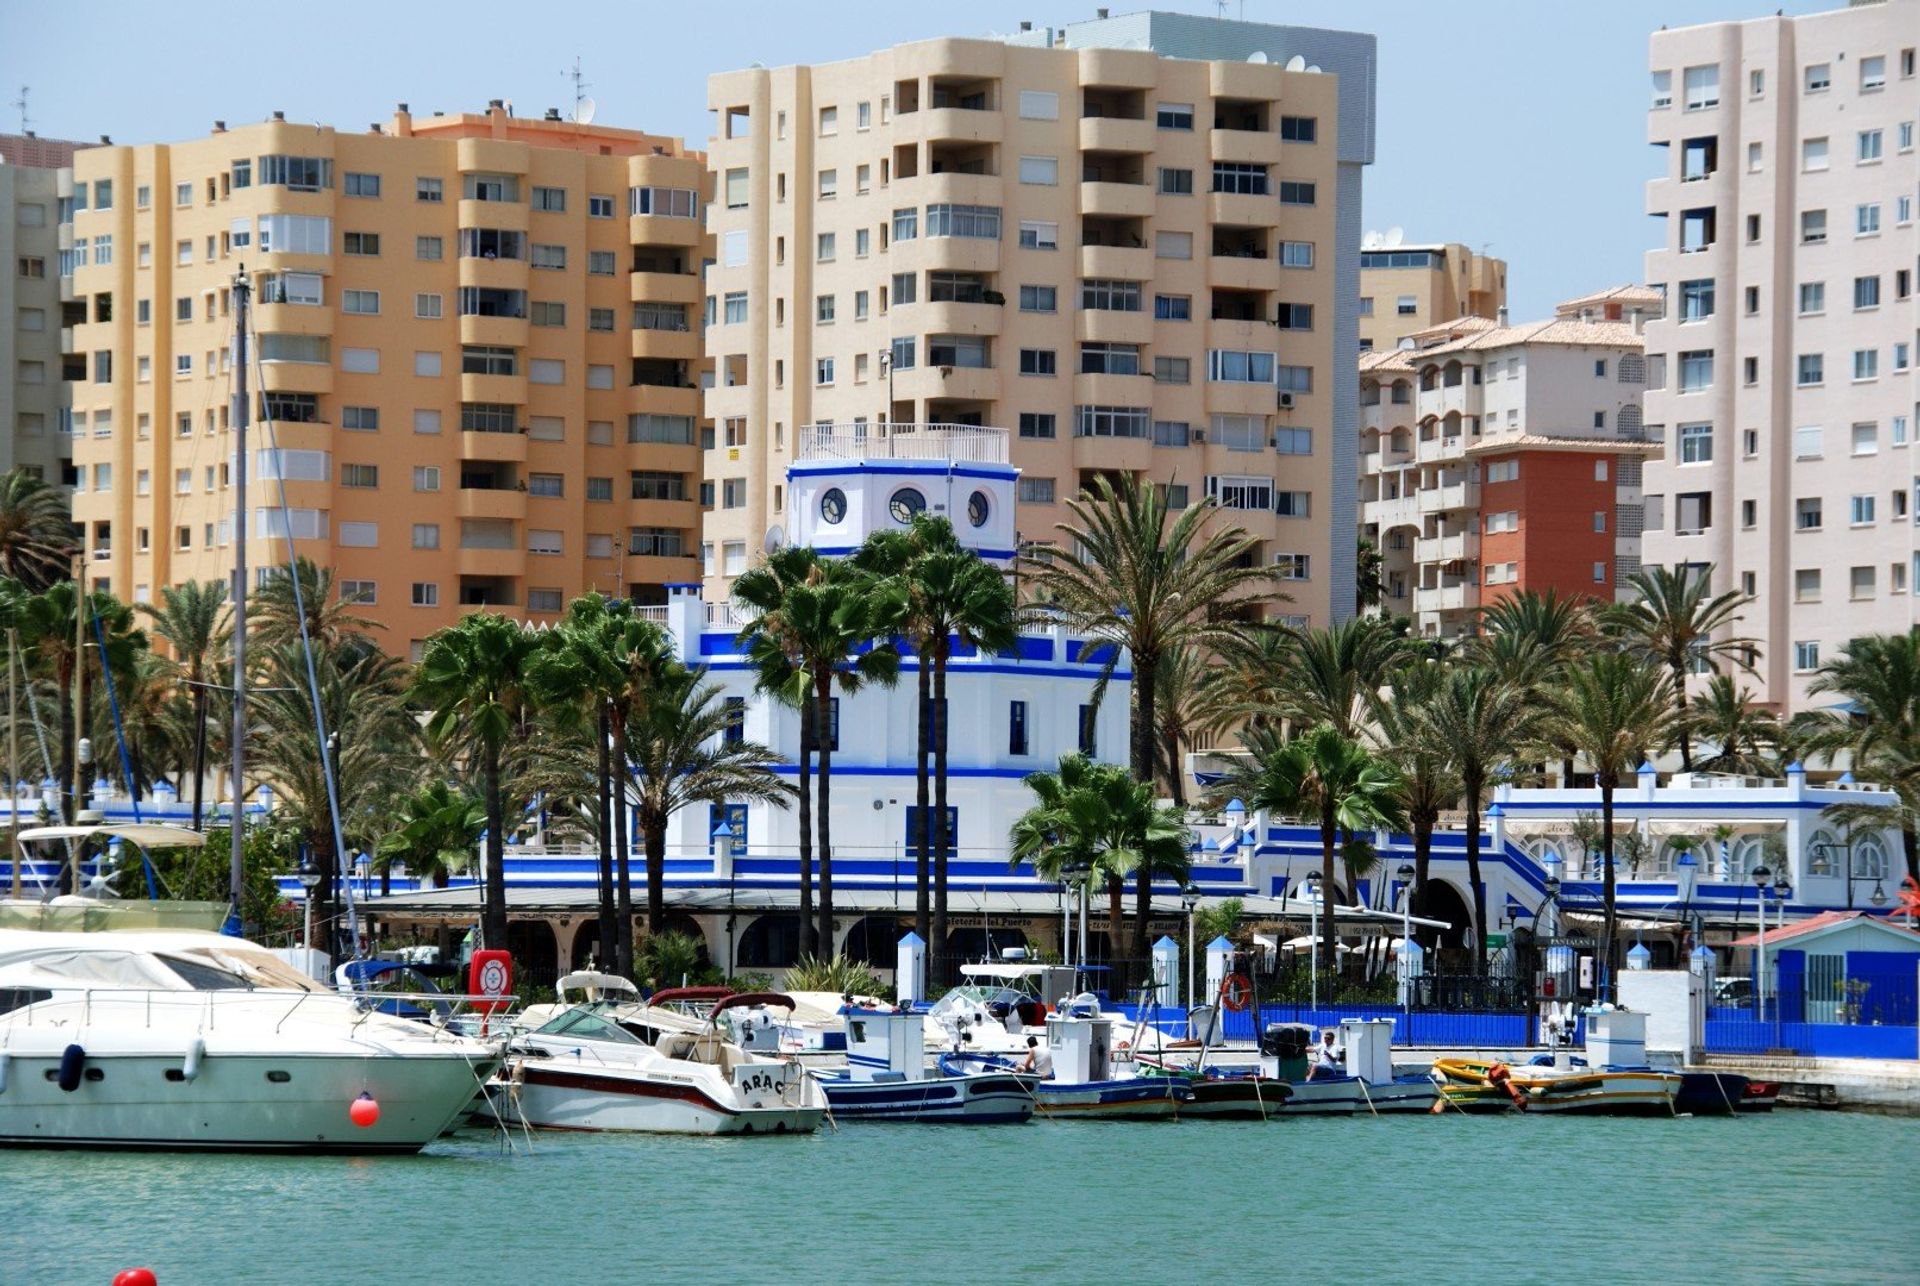 Estepona Harbour with its colourful cityscape backdrop